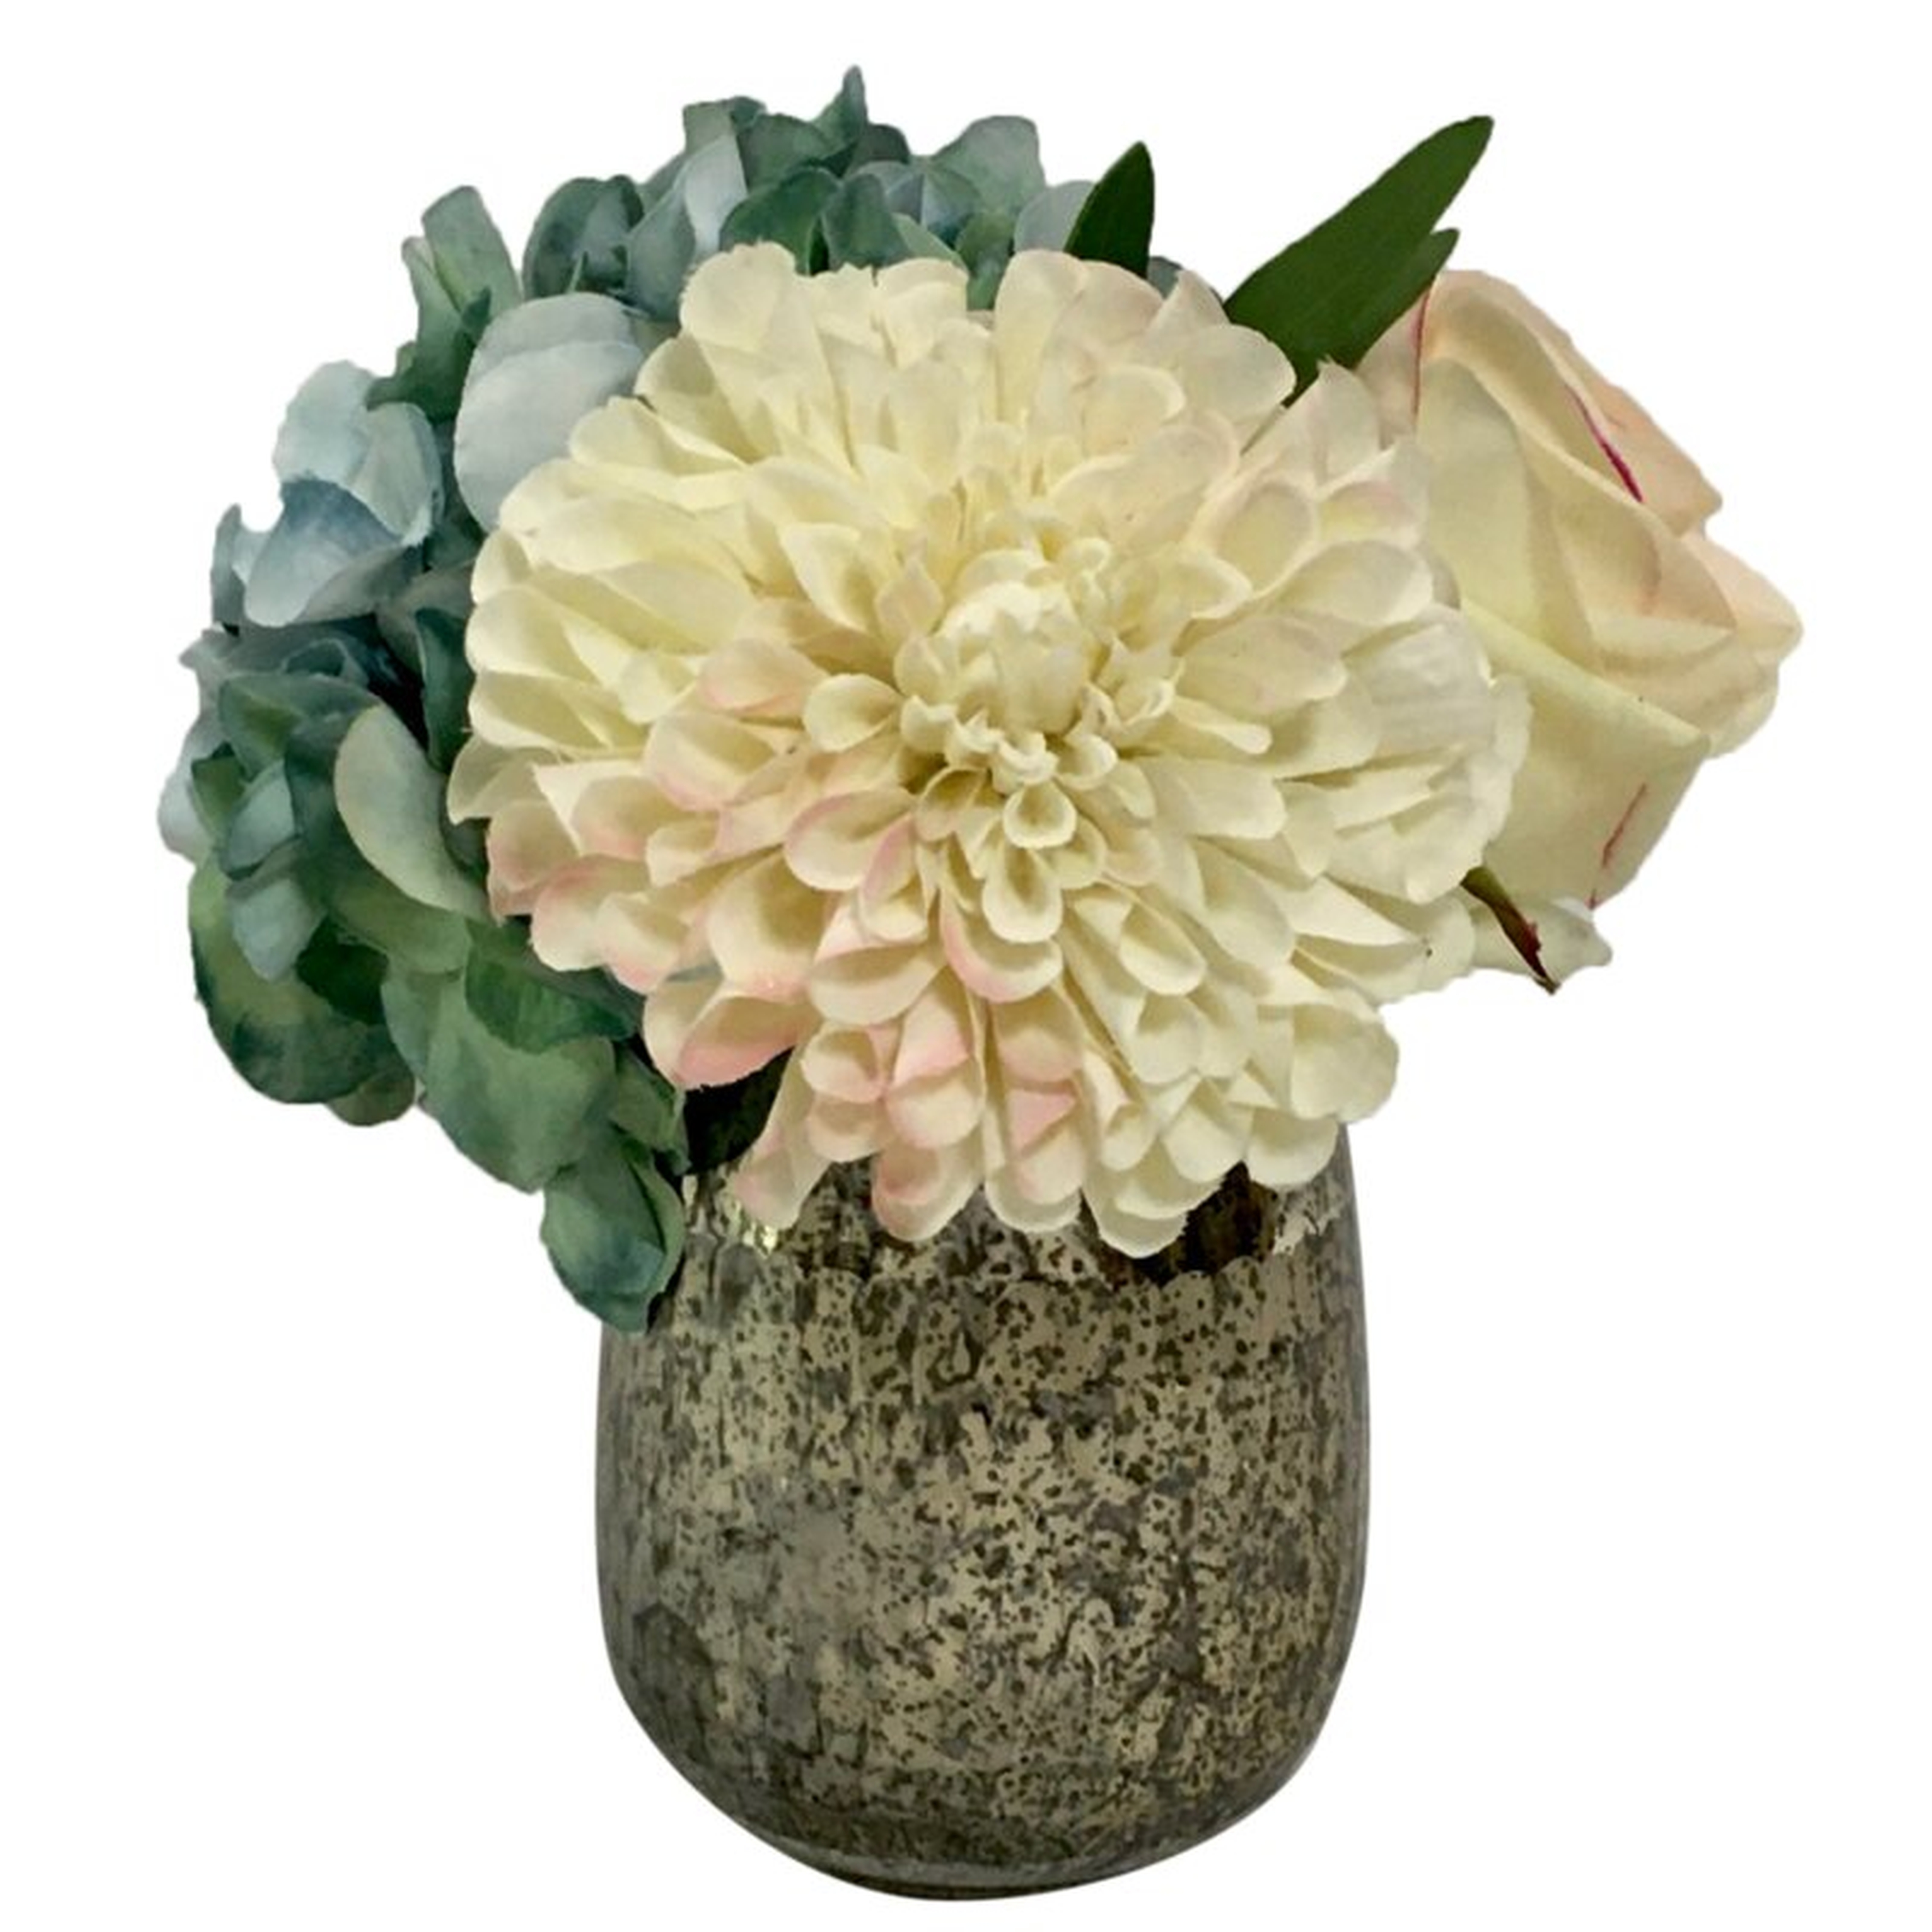 Dahlia, Rose & Hydrangea Mixed Centerpiece in Vase Flowers/Leaves Color: Blue/White - Perigold